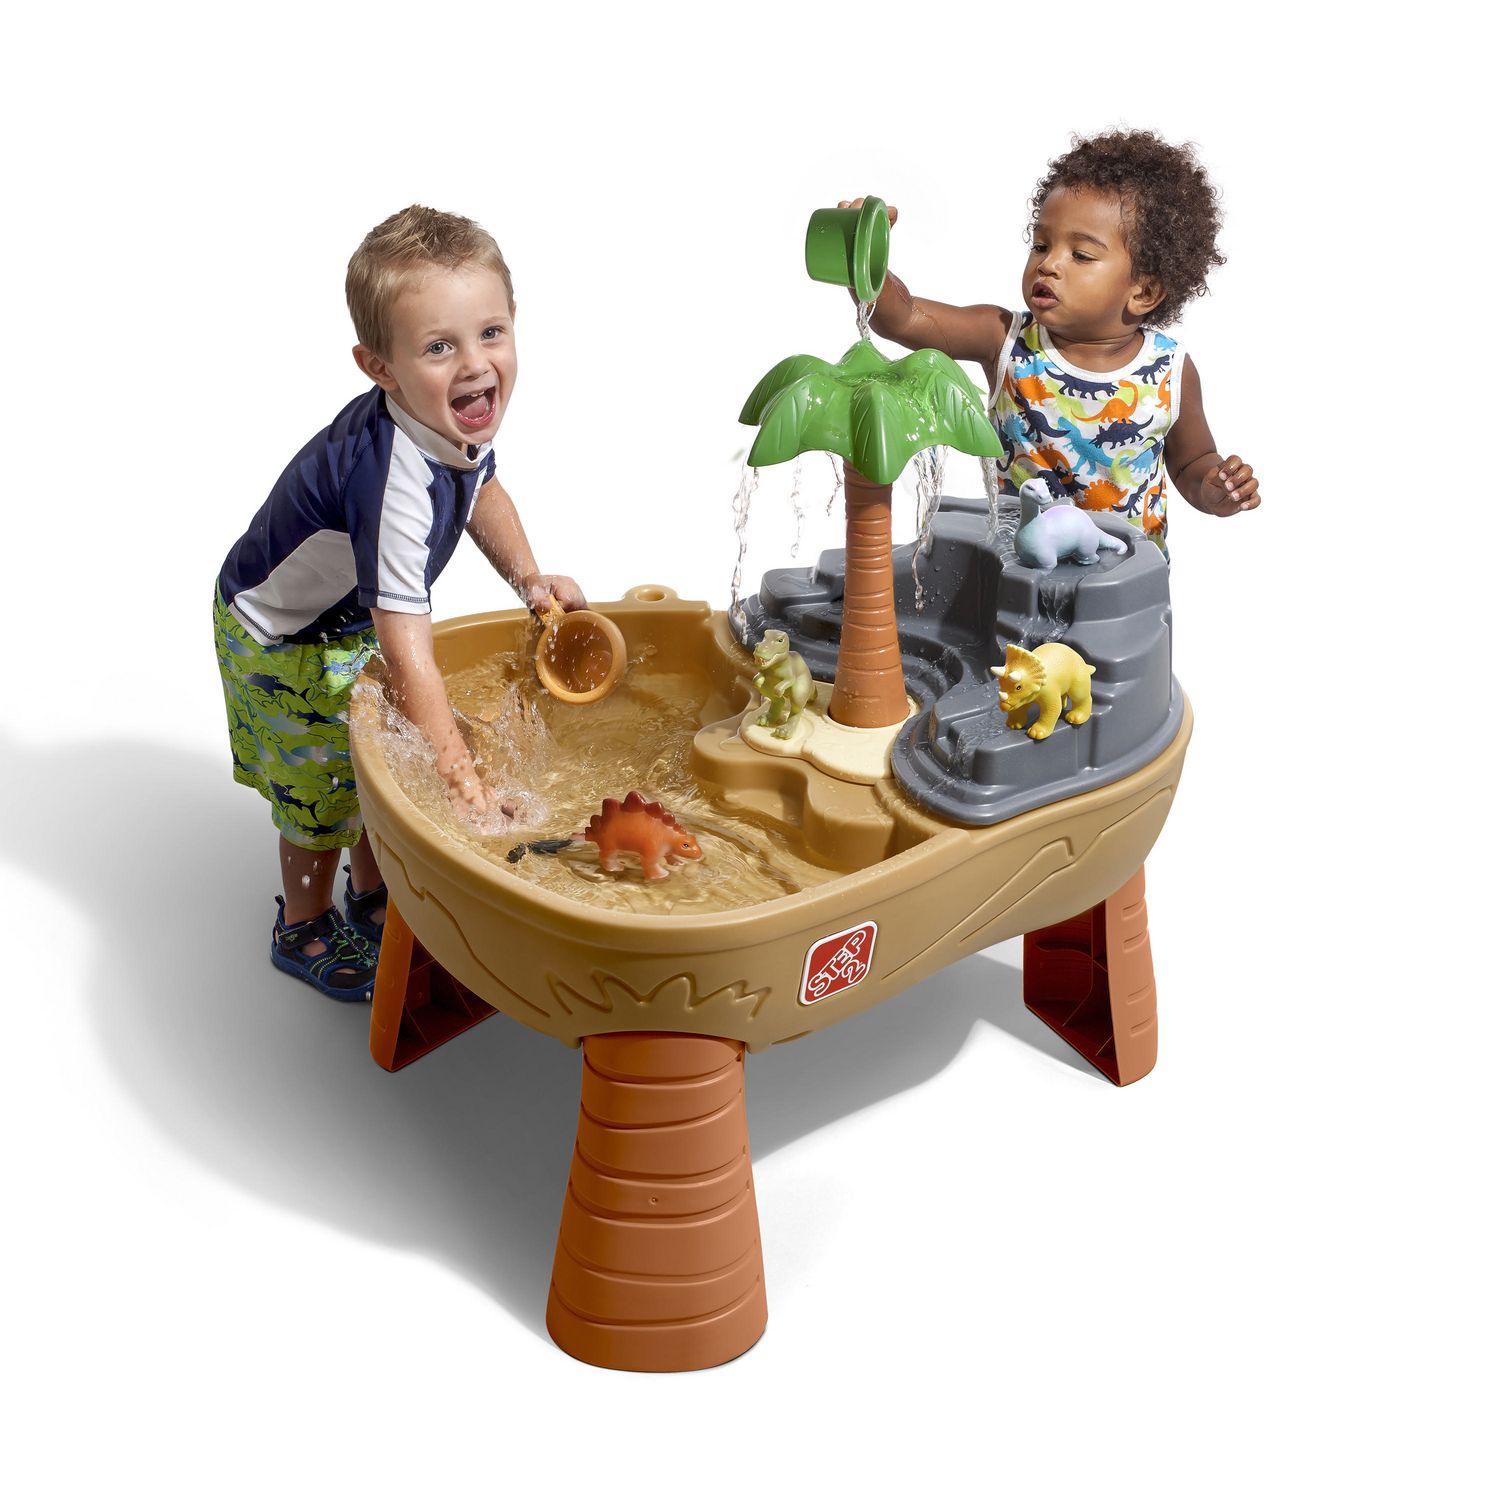 sand and water playset